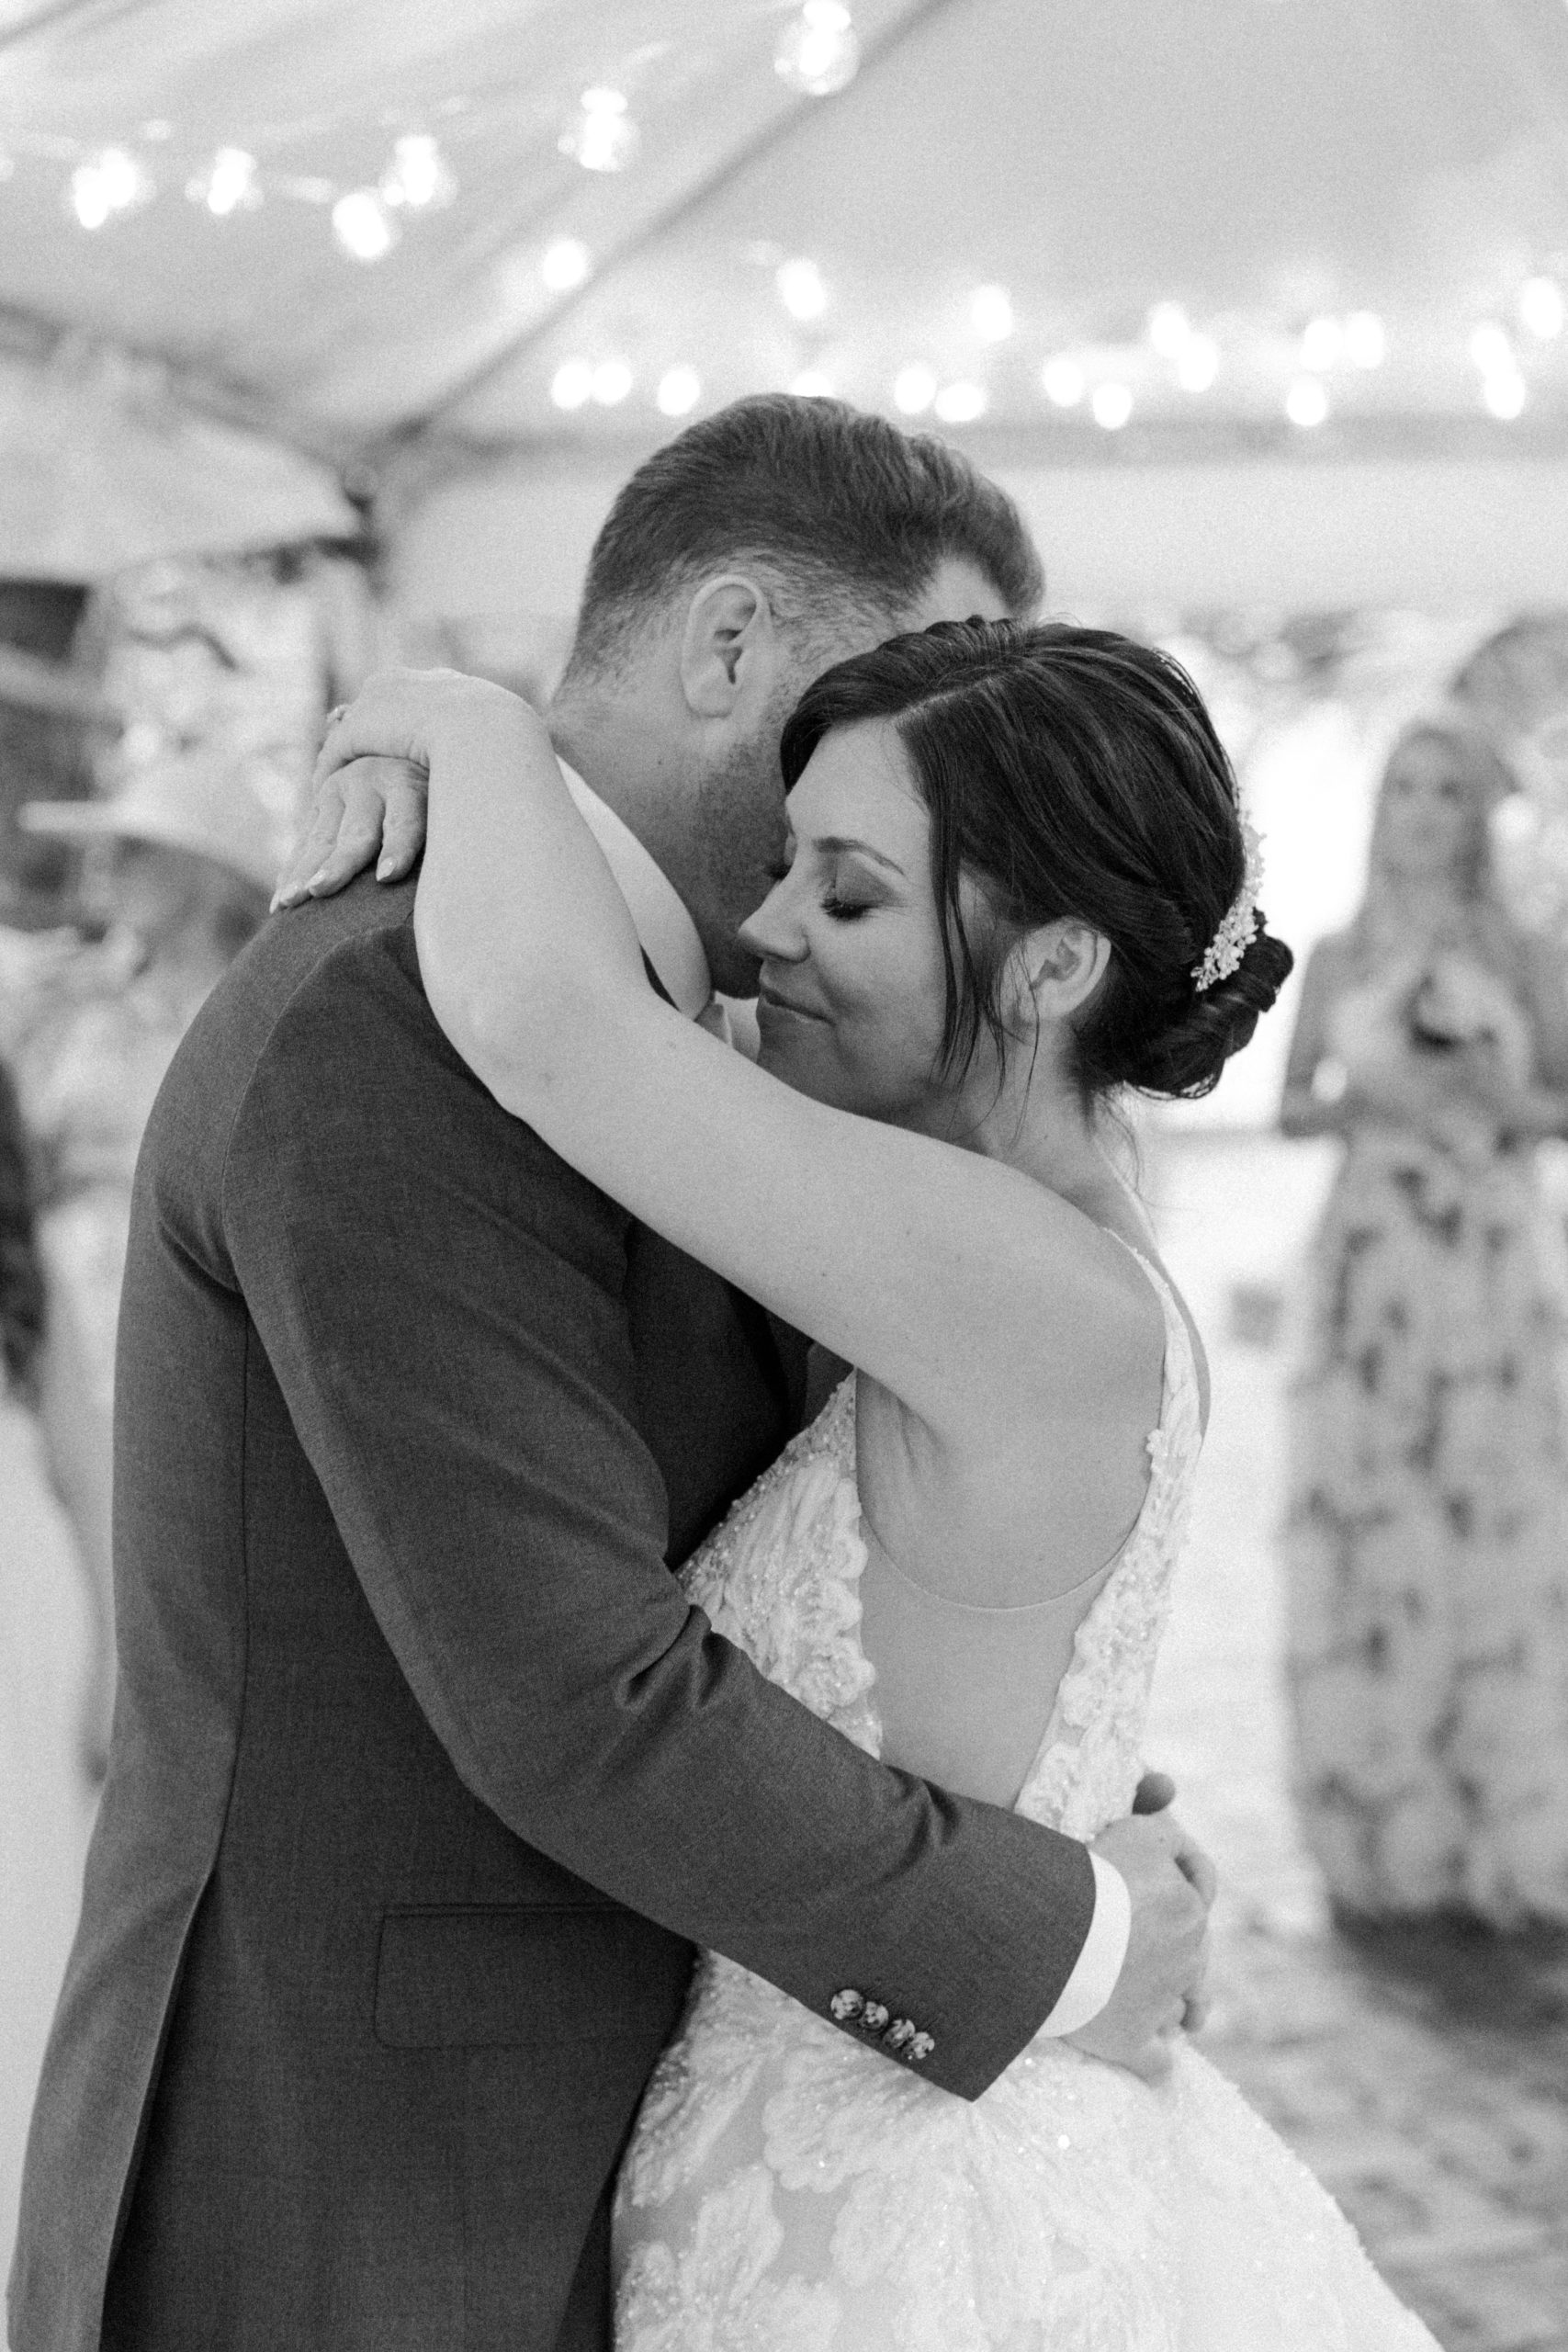 the Key West photographer captures the groom and bride hold each other during their first dance